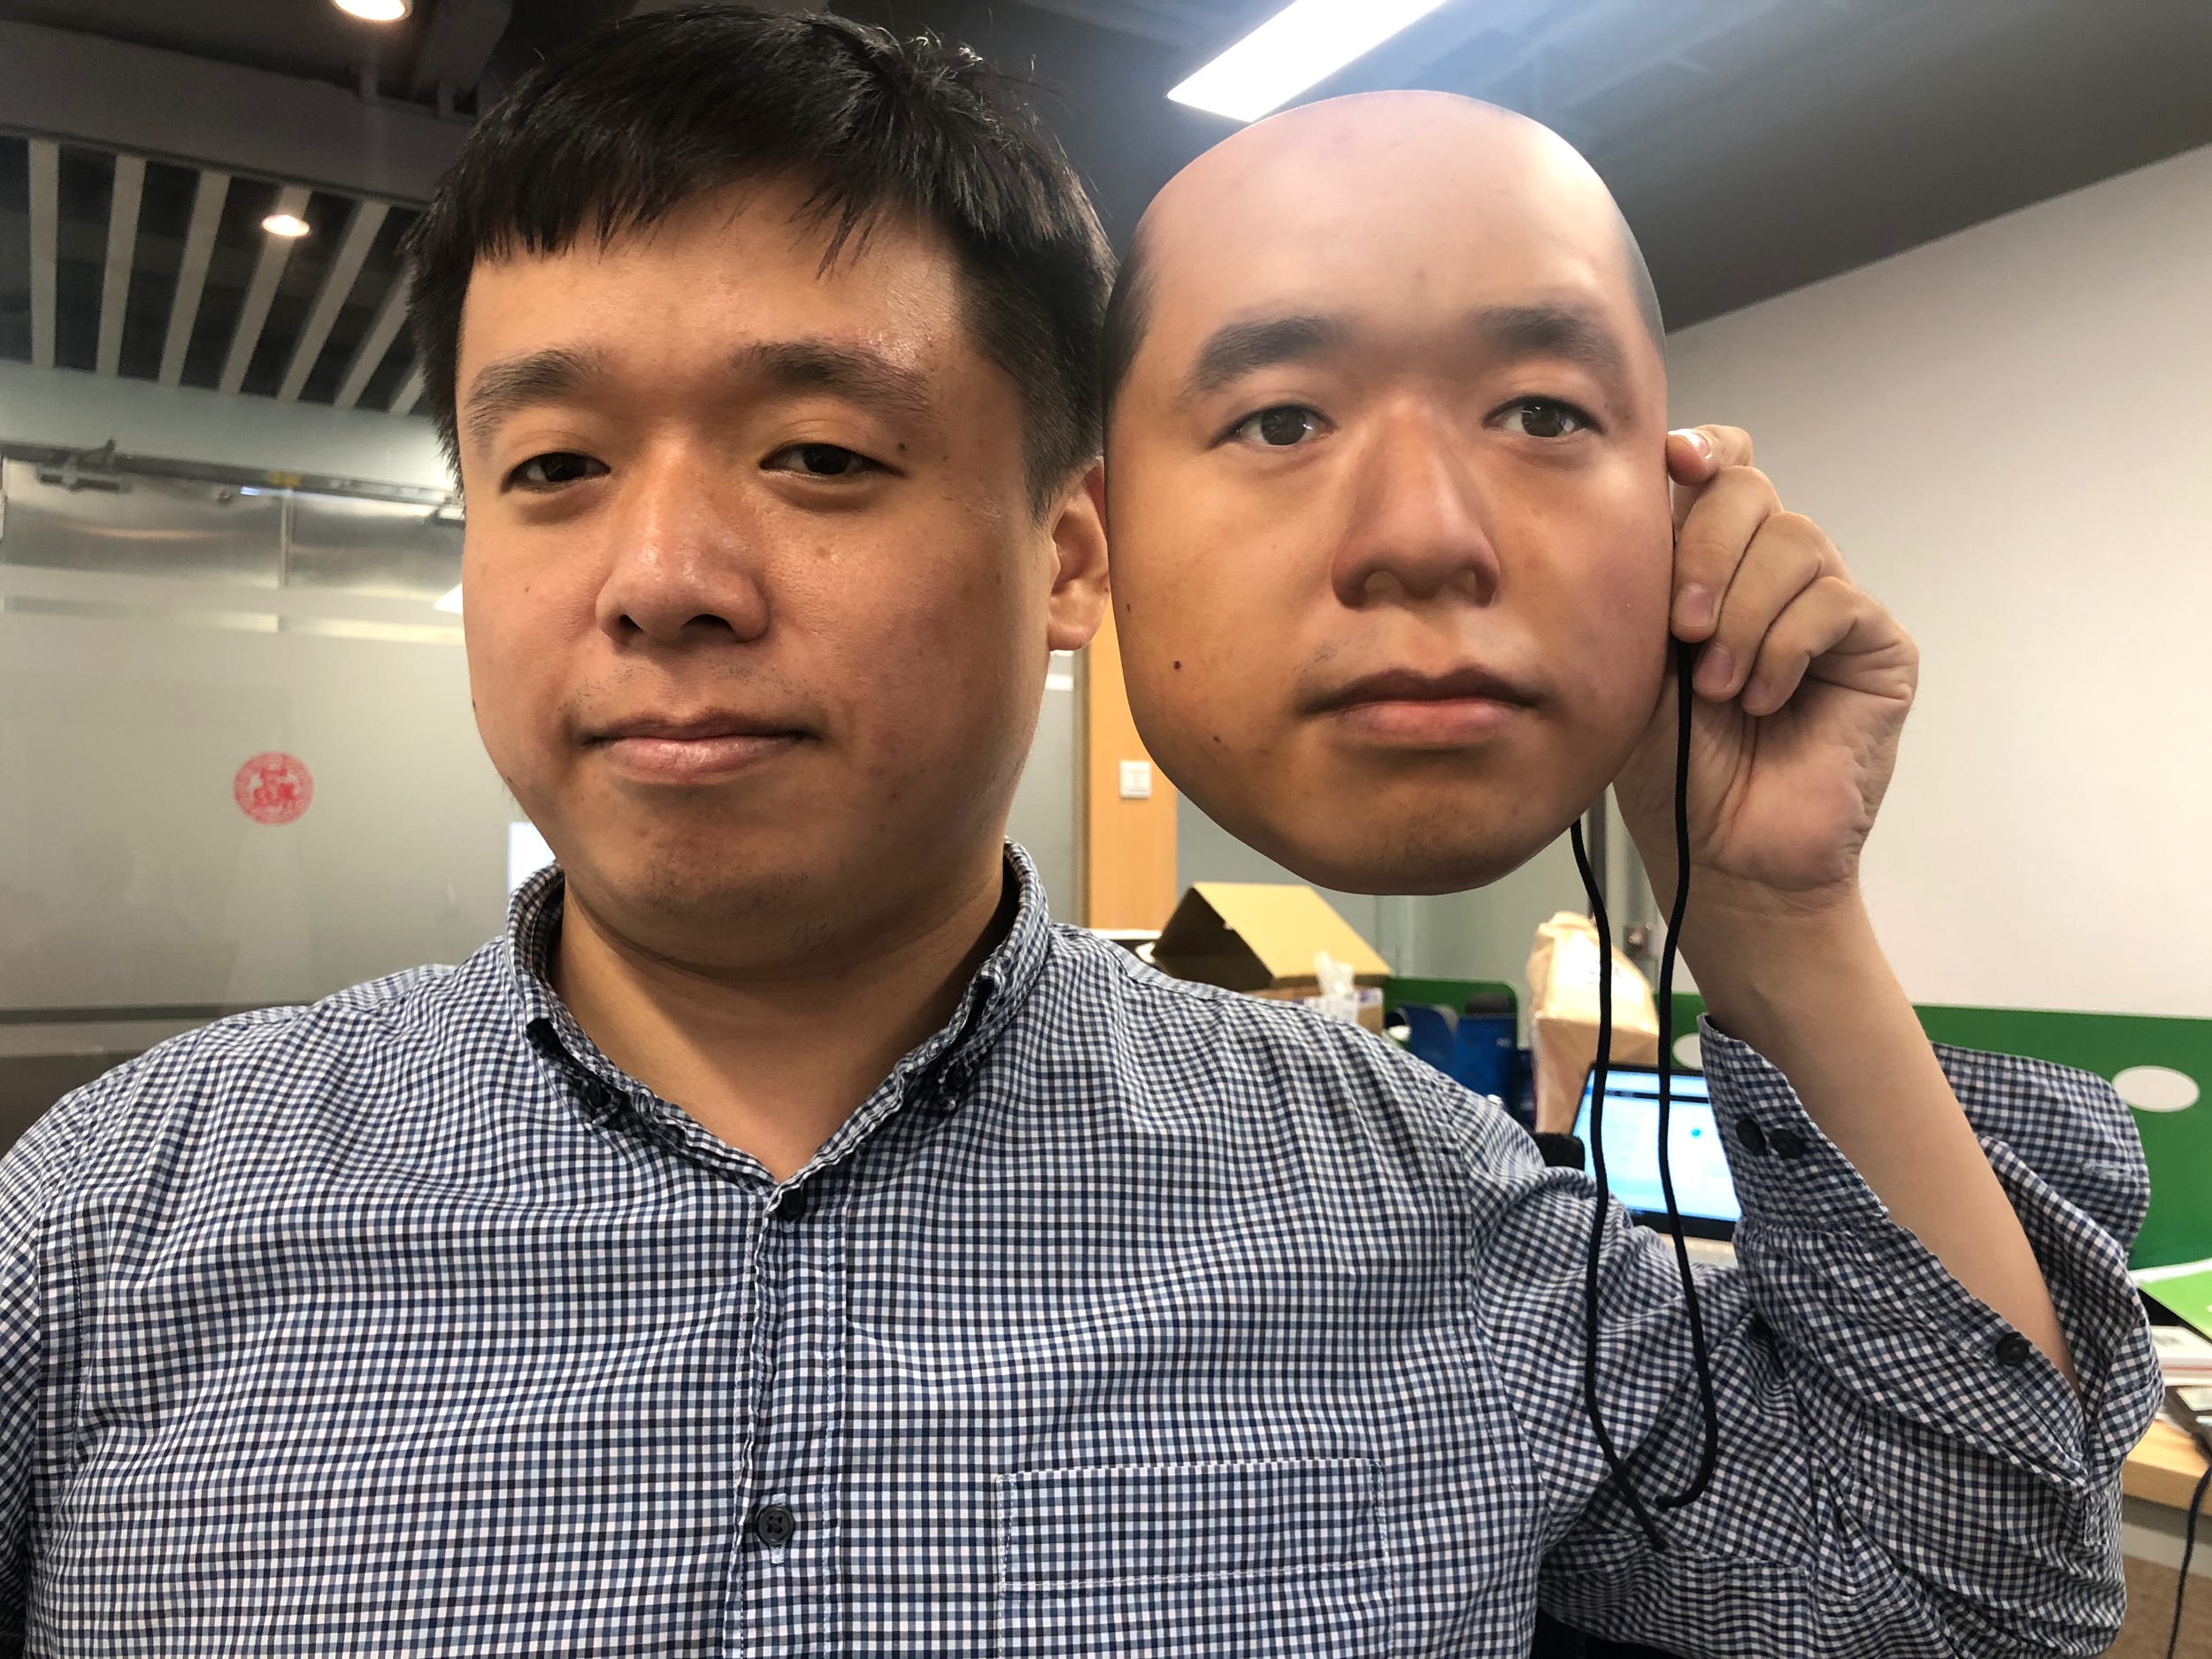 3D mask deceives Chinese security systems, but not Face ID